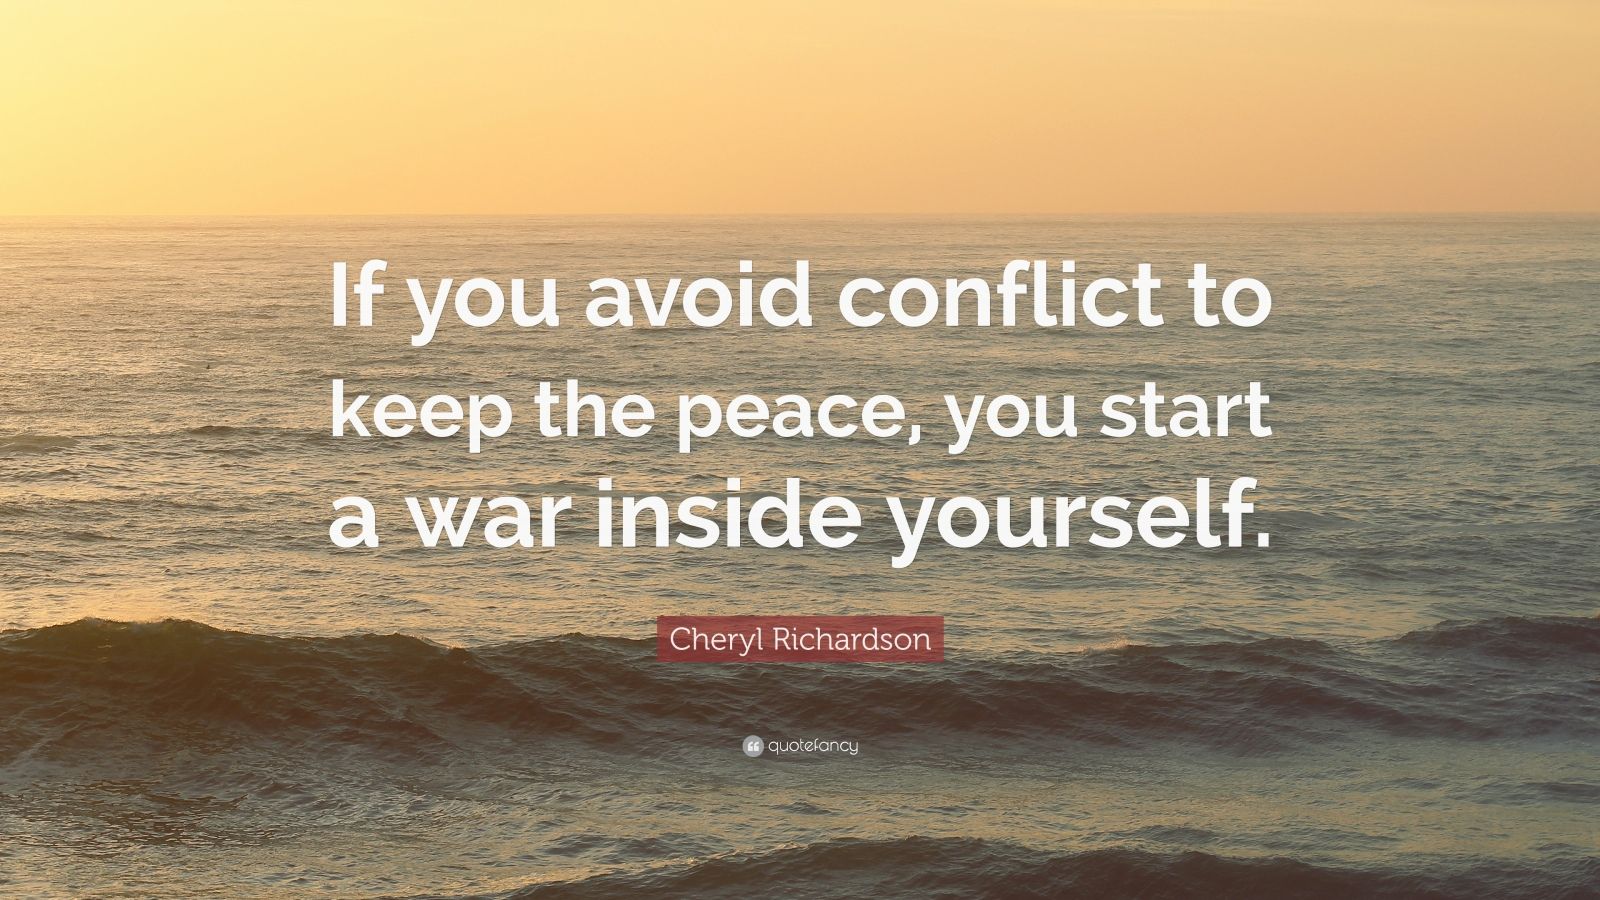 Cheryl Richardson Quote: “If you avoid conflict to keep the peace, you